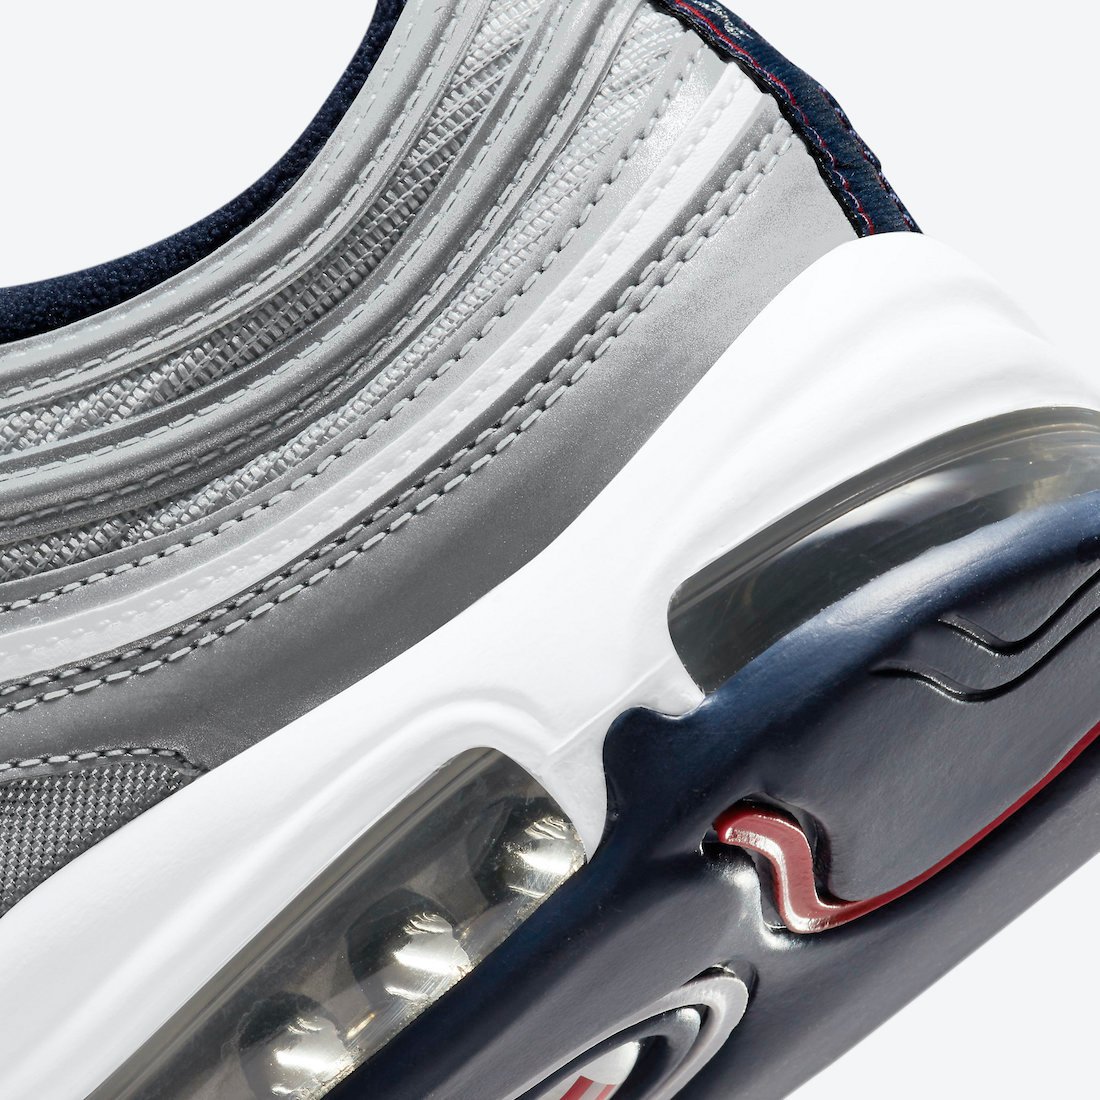 Nike Air Max 97 Puerto Rico DH2319-001 Release Date